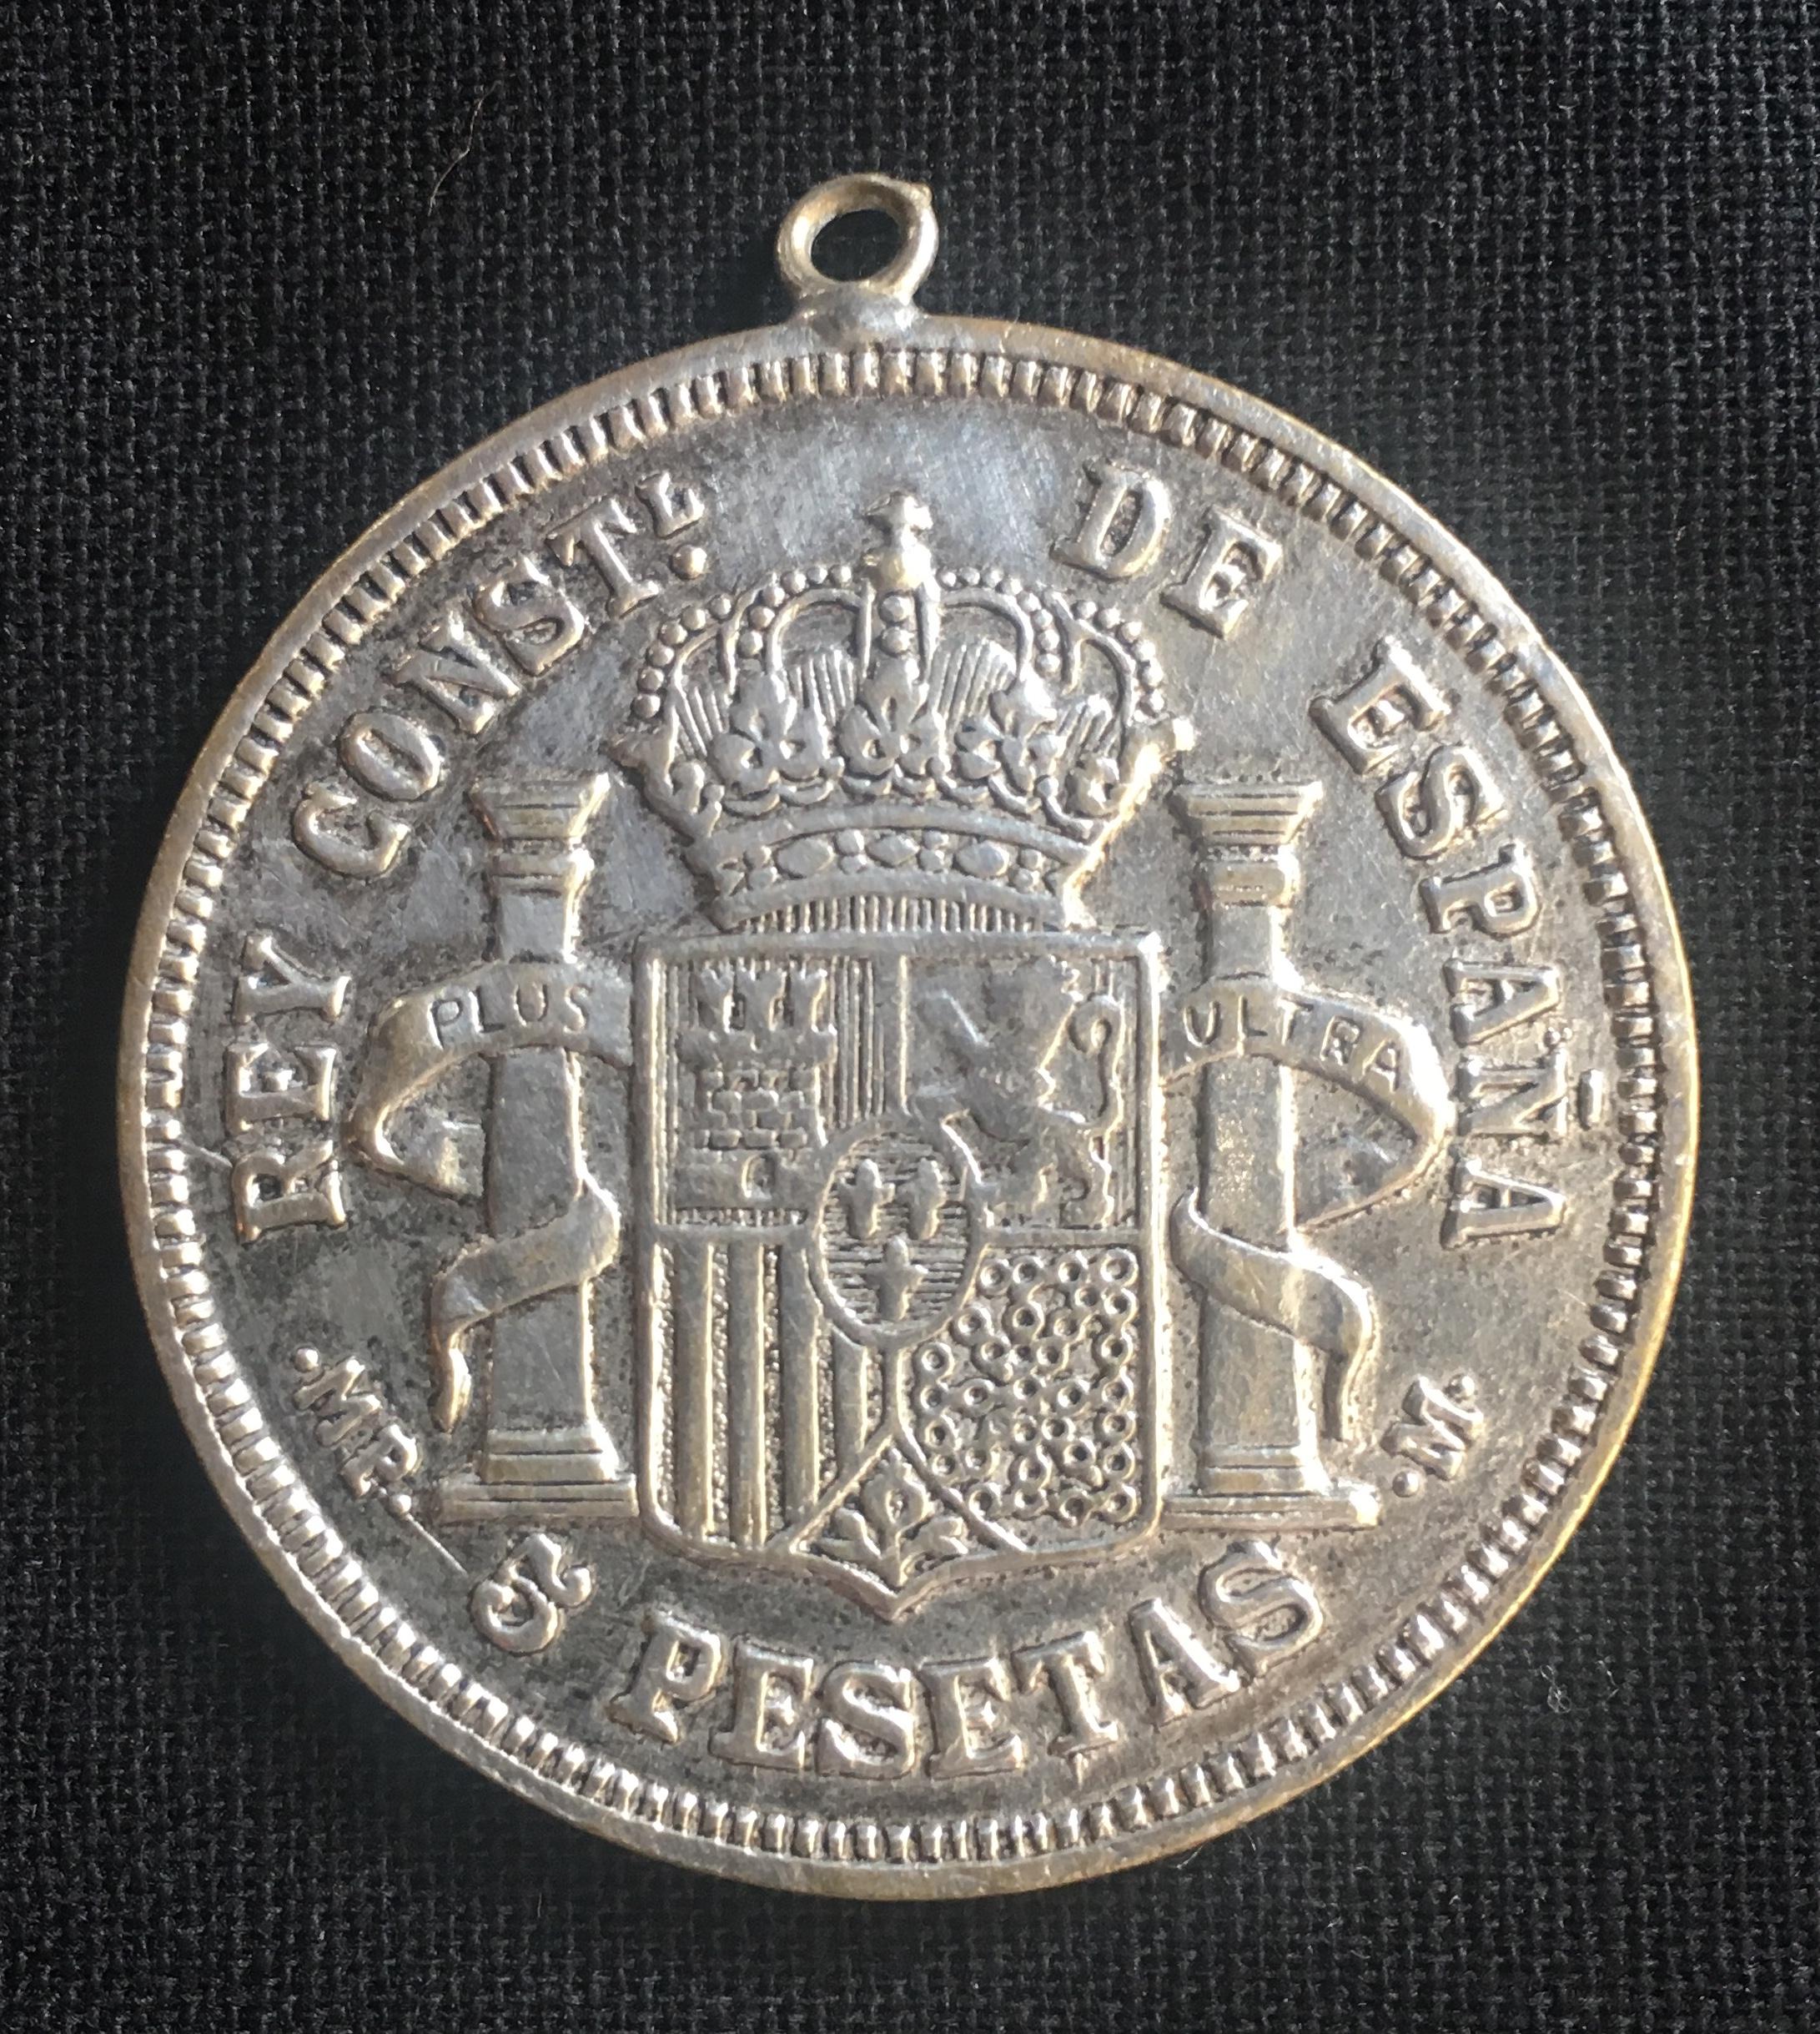 Fine Spanish coin that was previously on a silver bracelet (sold separately).
Spain, Alphonse XII (1874-1885), 5 Peseta, 1882, 

Year: 1882
Metal: Silver.